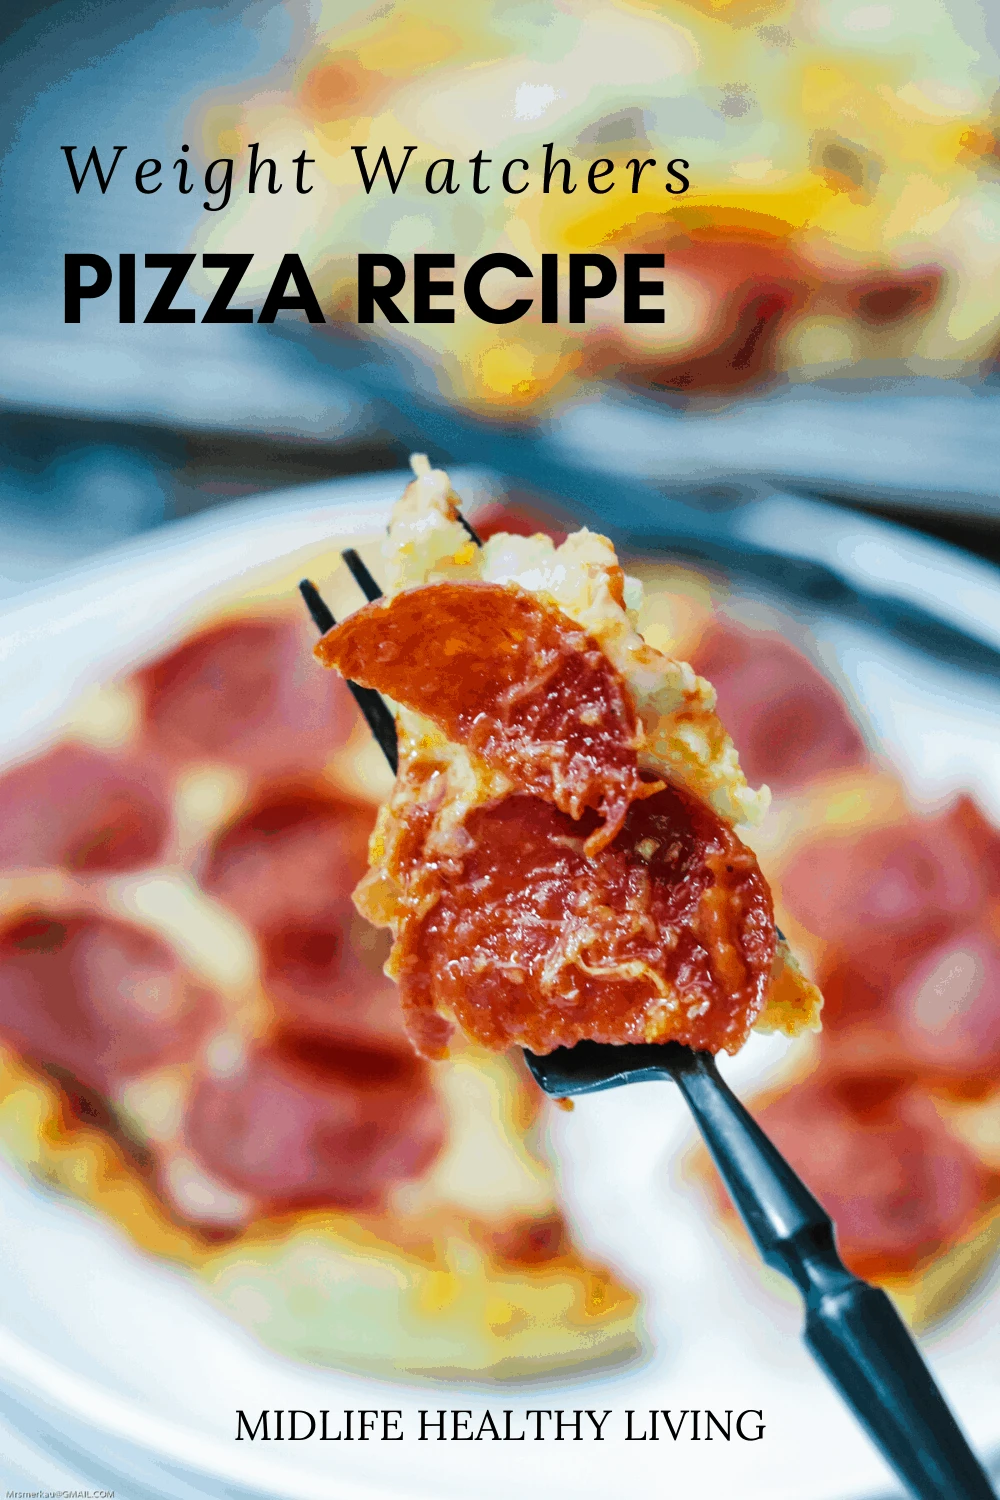 Here we have a pin showing the finished ww pizza recipe with a bite ready to be eaten.